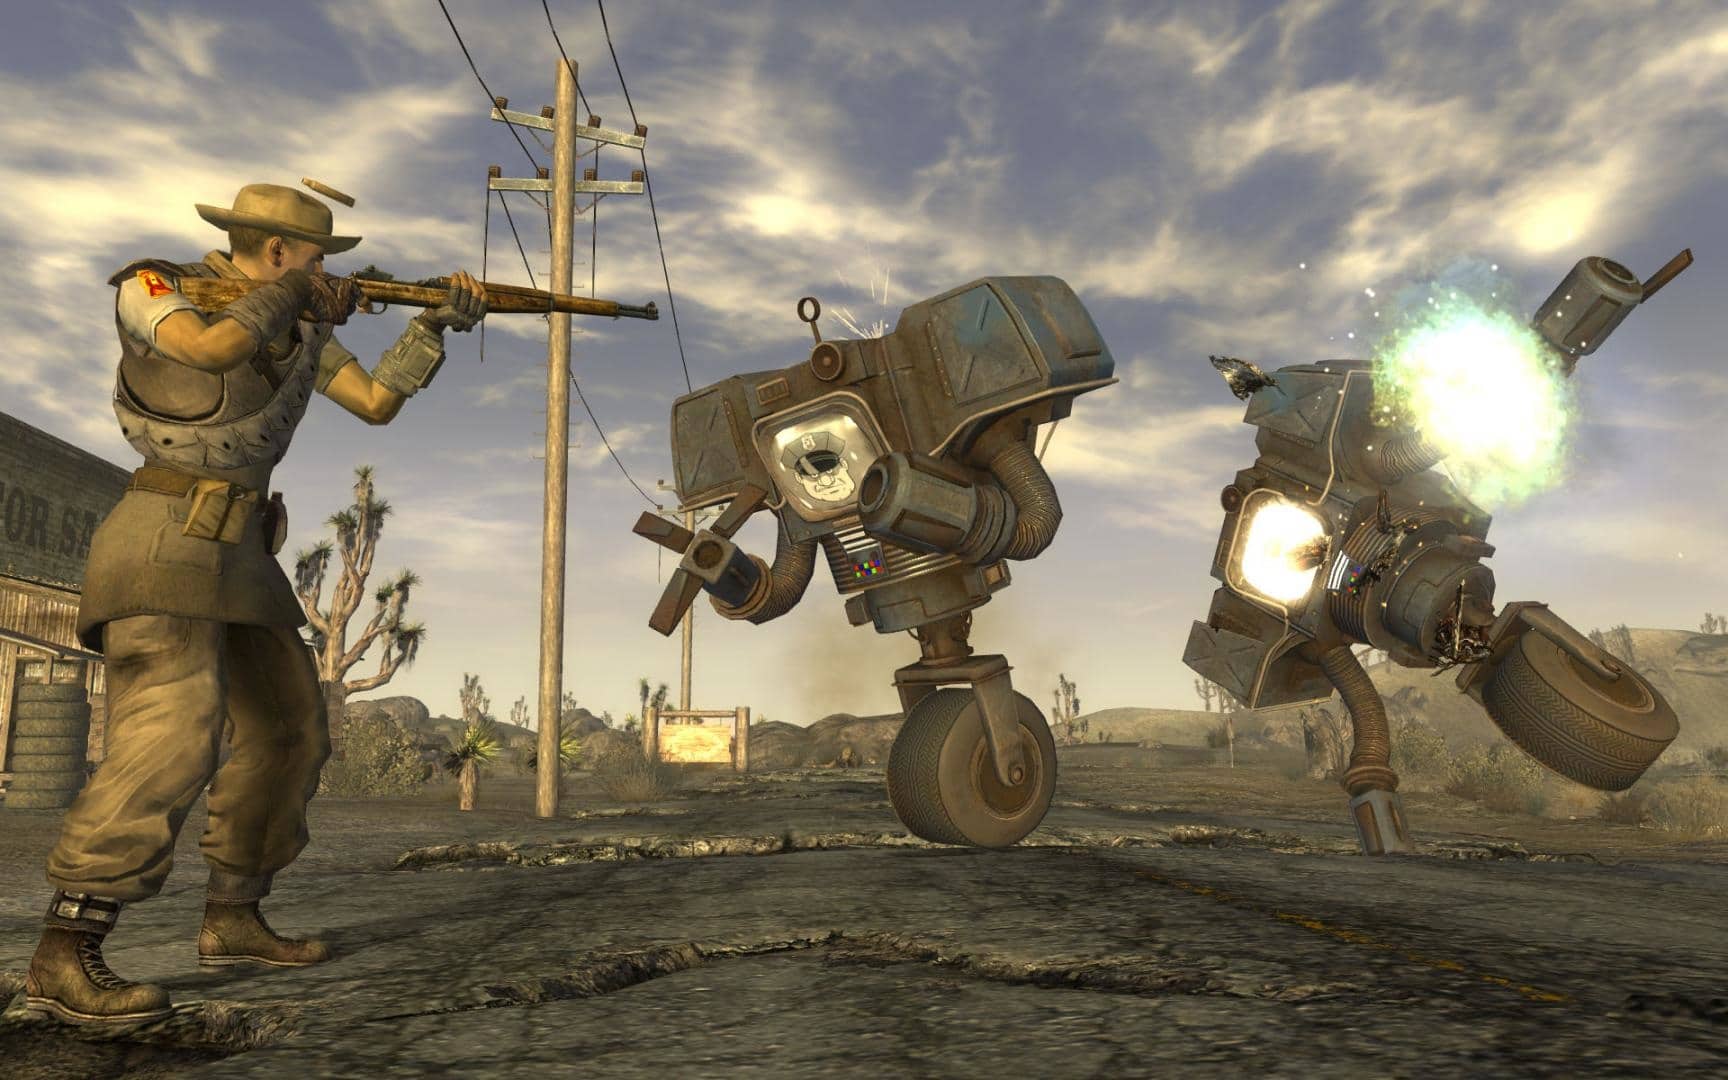 (The second throw also earns Obsidian a lot of respect Fallout: New Vegas is a cult game, but suffers from bugs. Publisher Bethesda had probably set too tight a deadline for completion.)